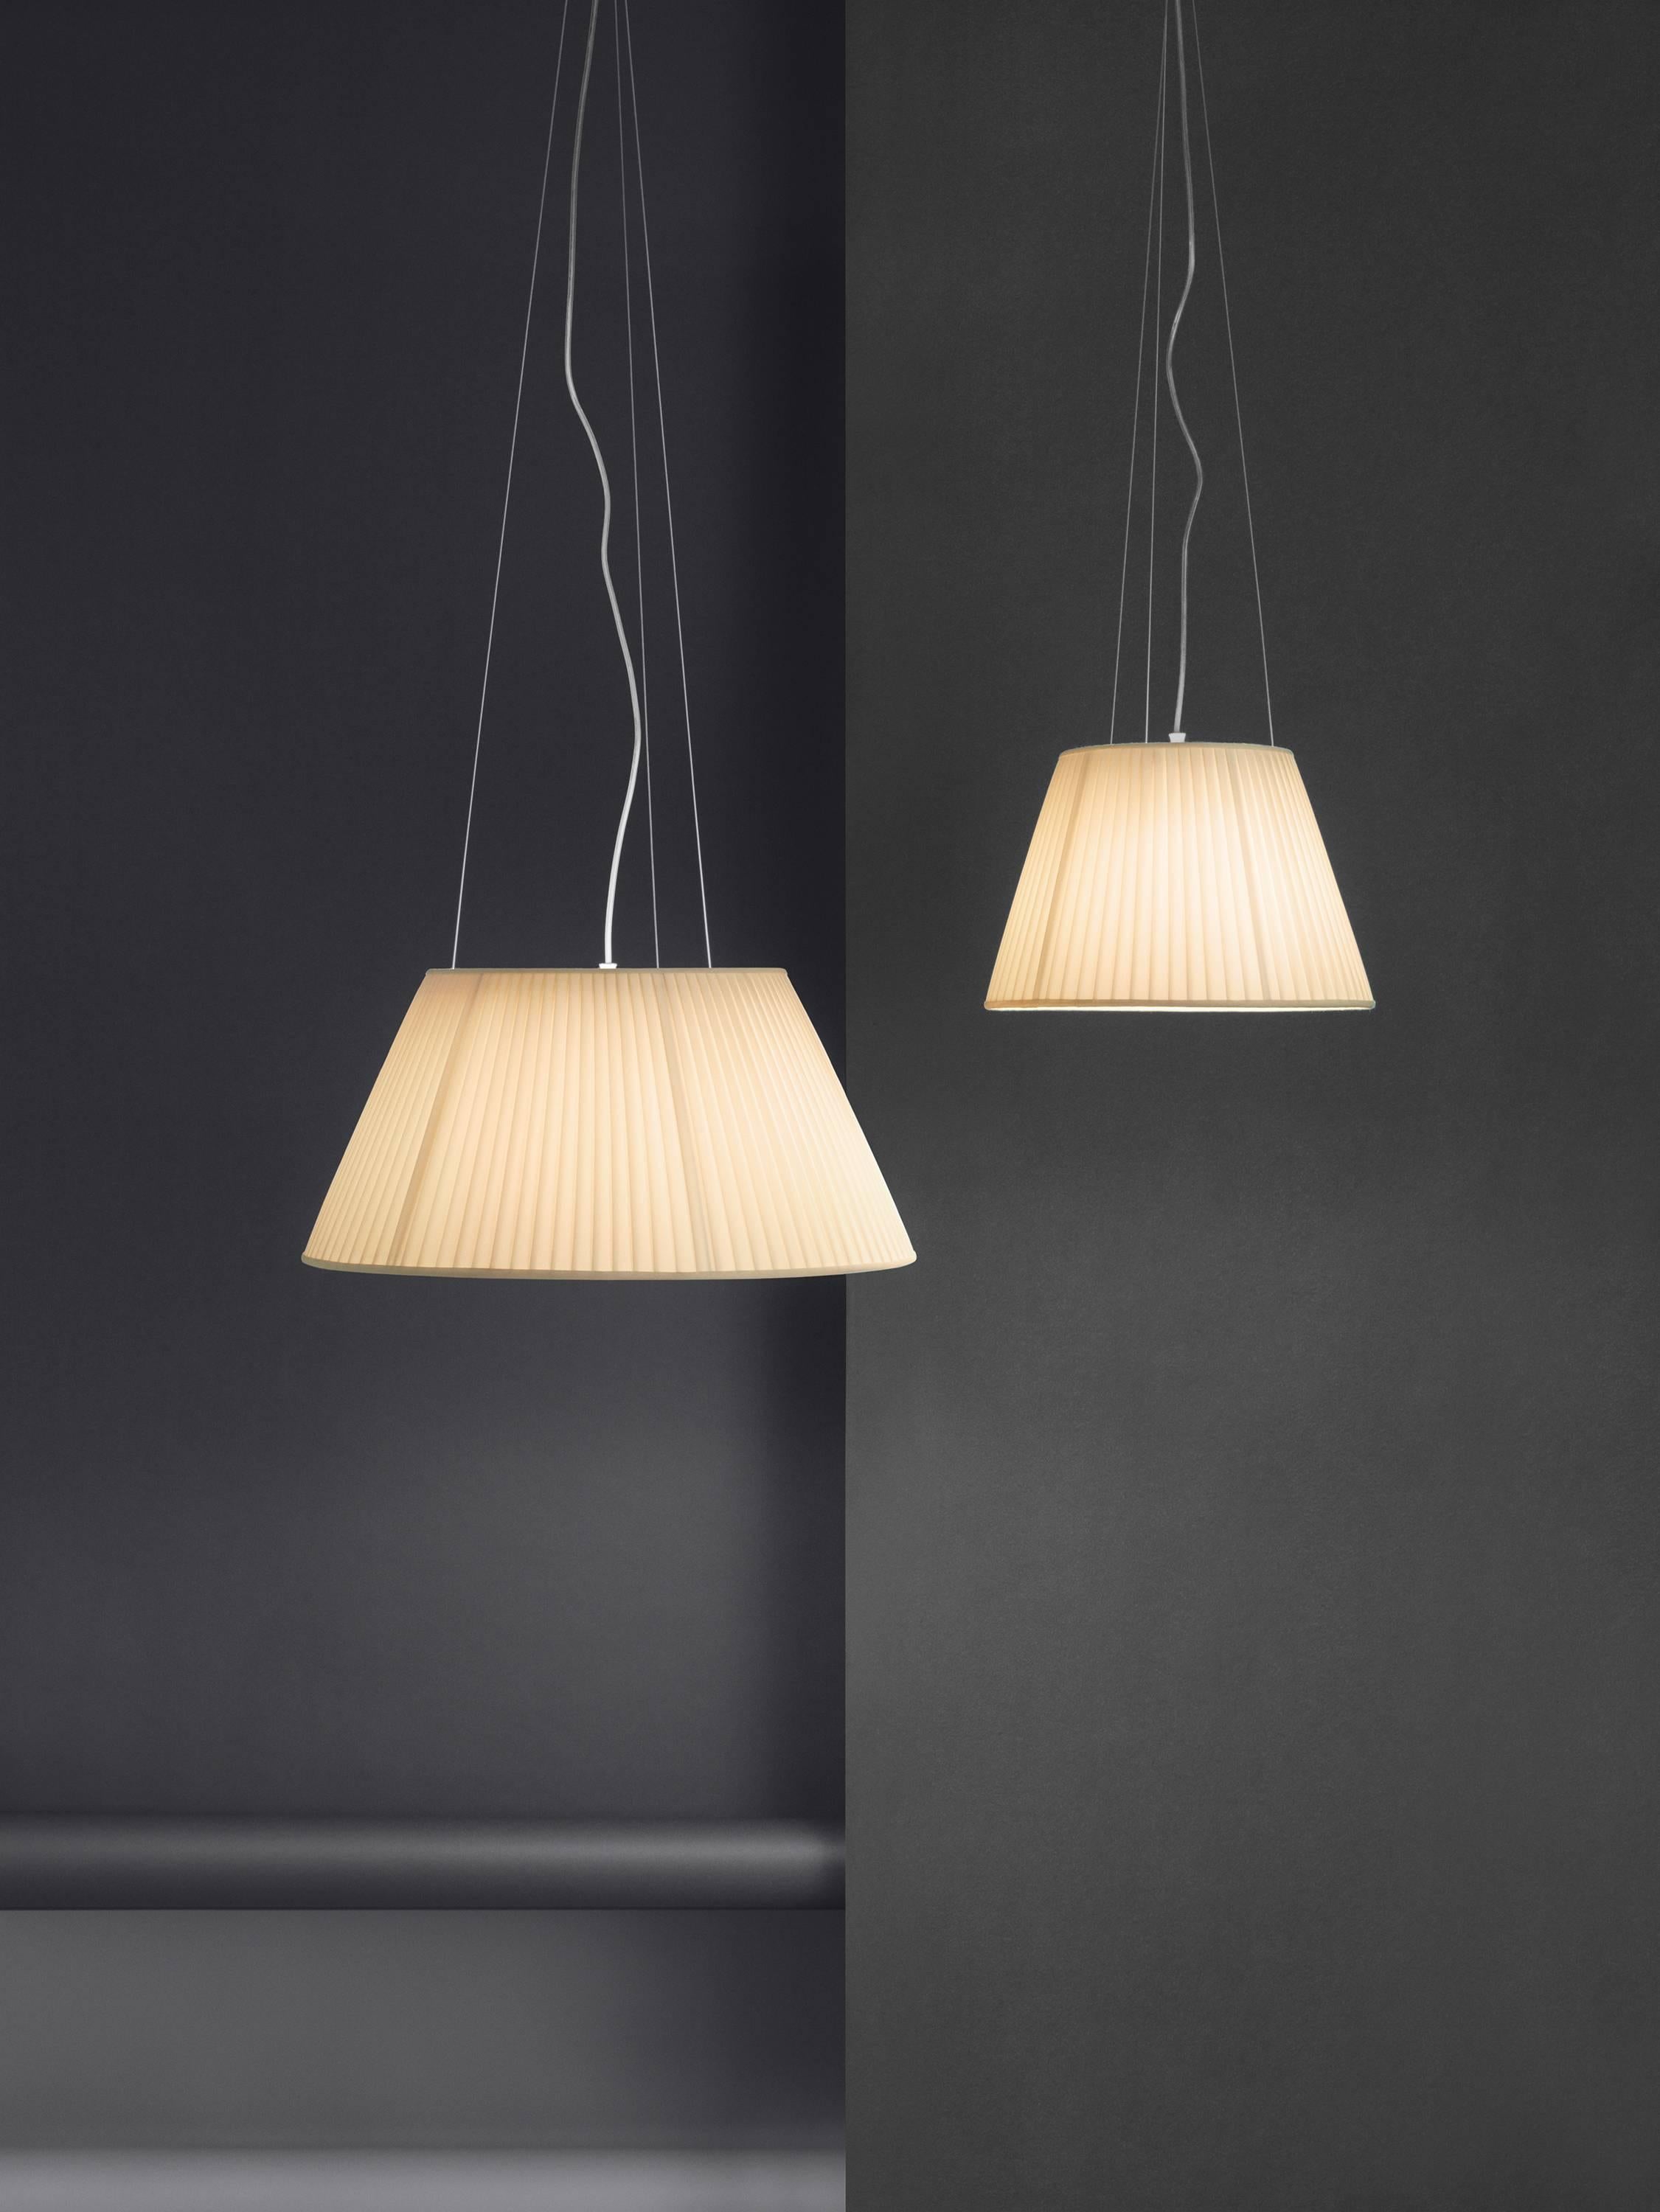 Part of the Romeo family created by industry innovator Philipe Starck, this stunning and strikingly simple pendant light provides diffused light through a plissé cloth shade and acid-etched pressed borosilicate glass internal diffuser. There is an